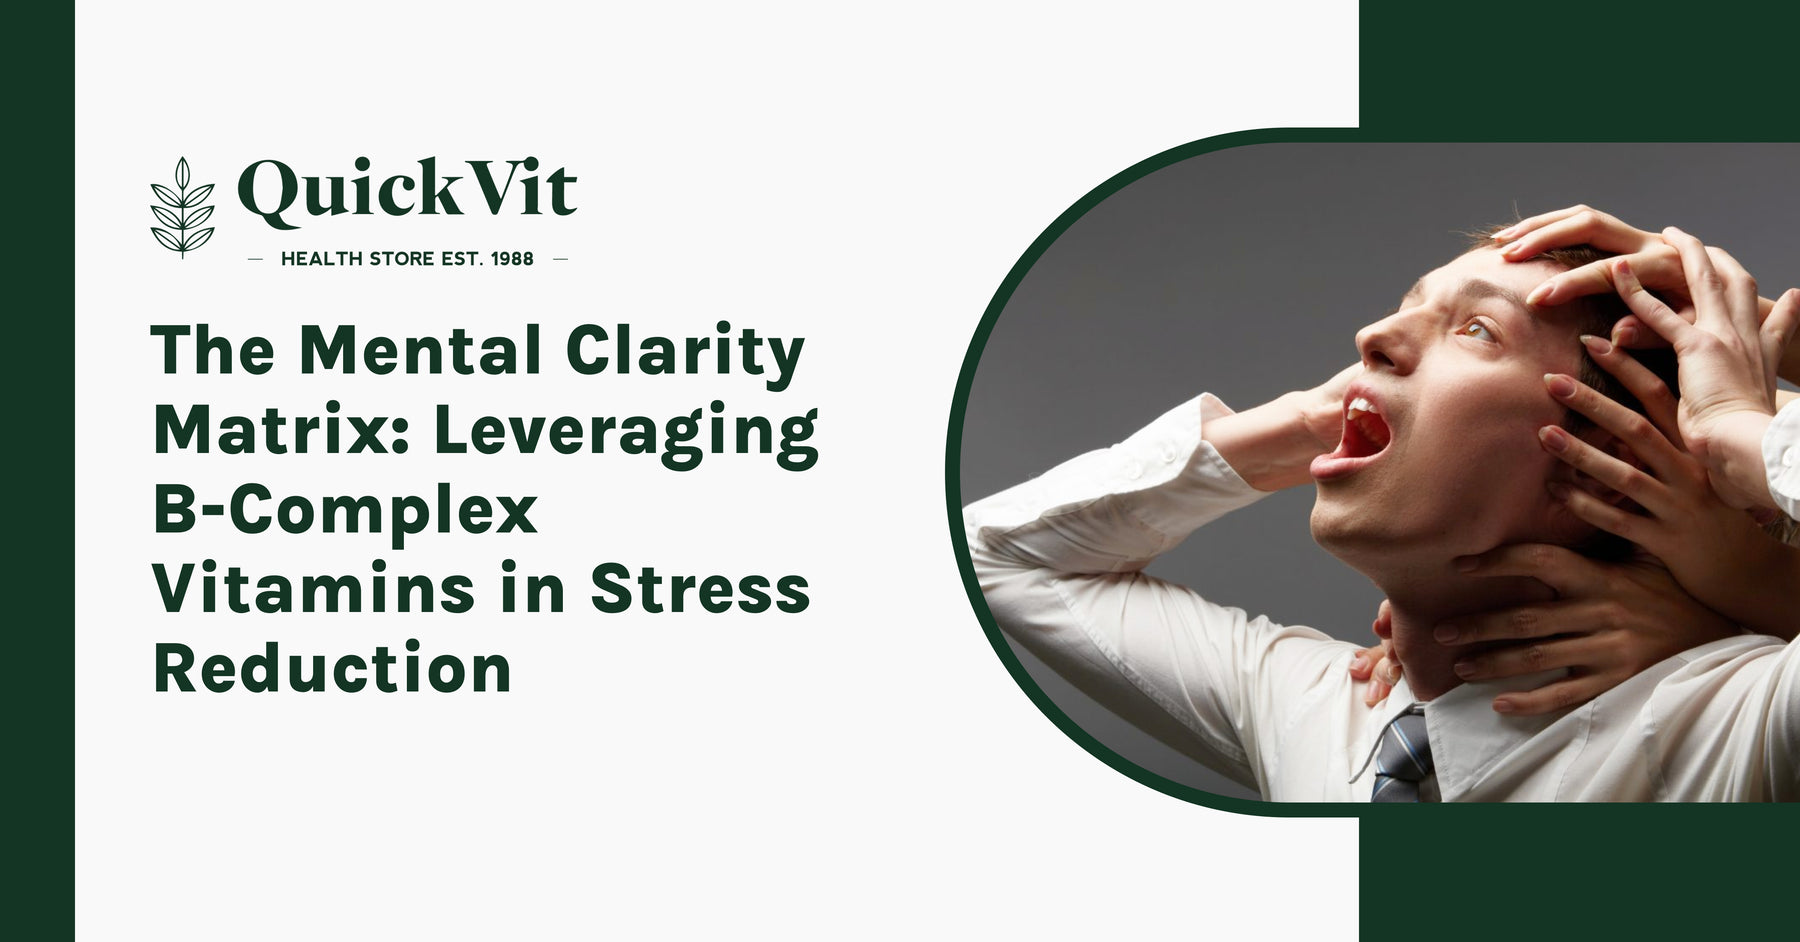 The Mental Clarity Matrix: Leveraging B-Complex Vitamins in Stress Reduction